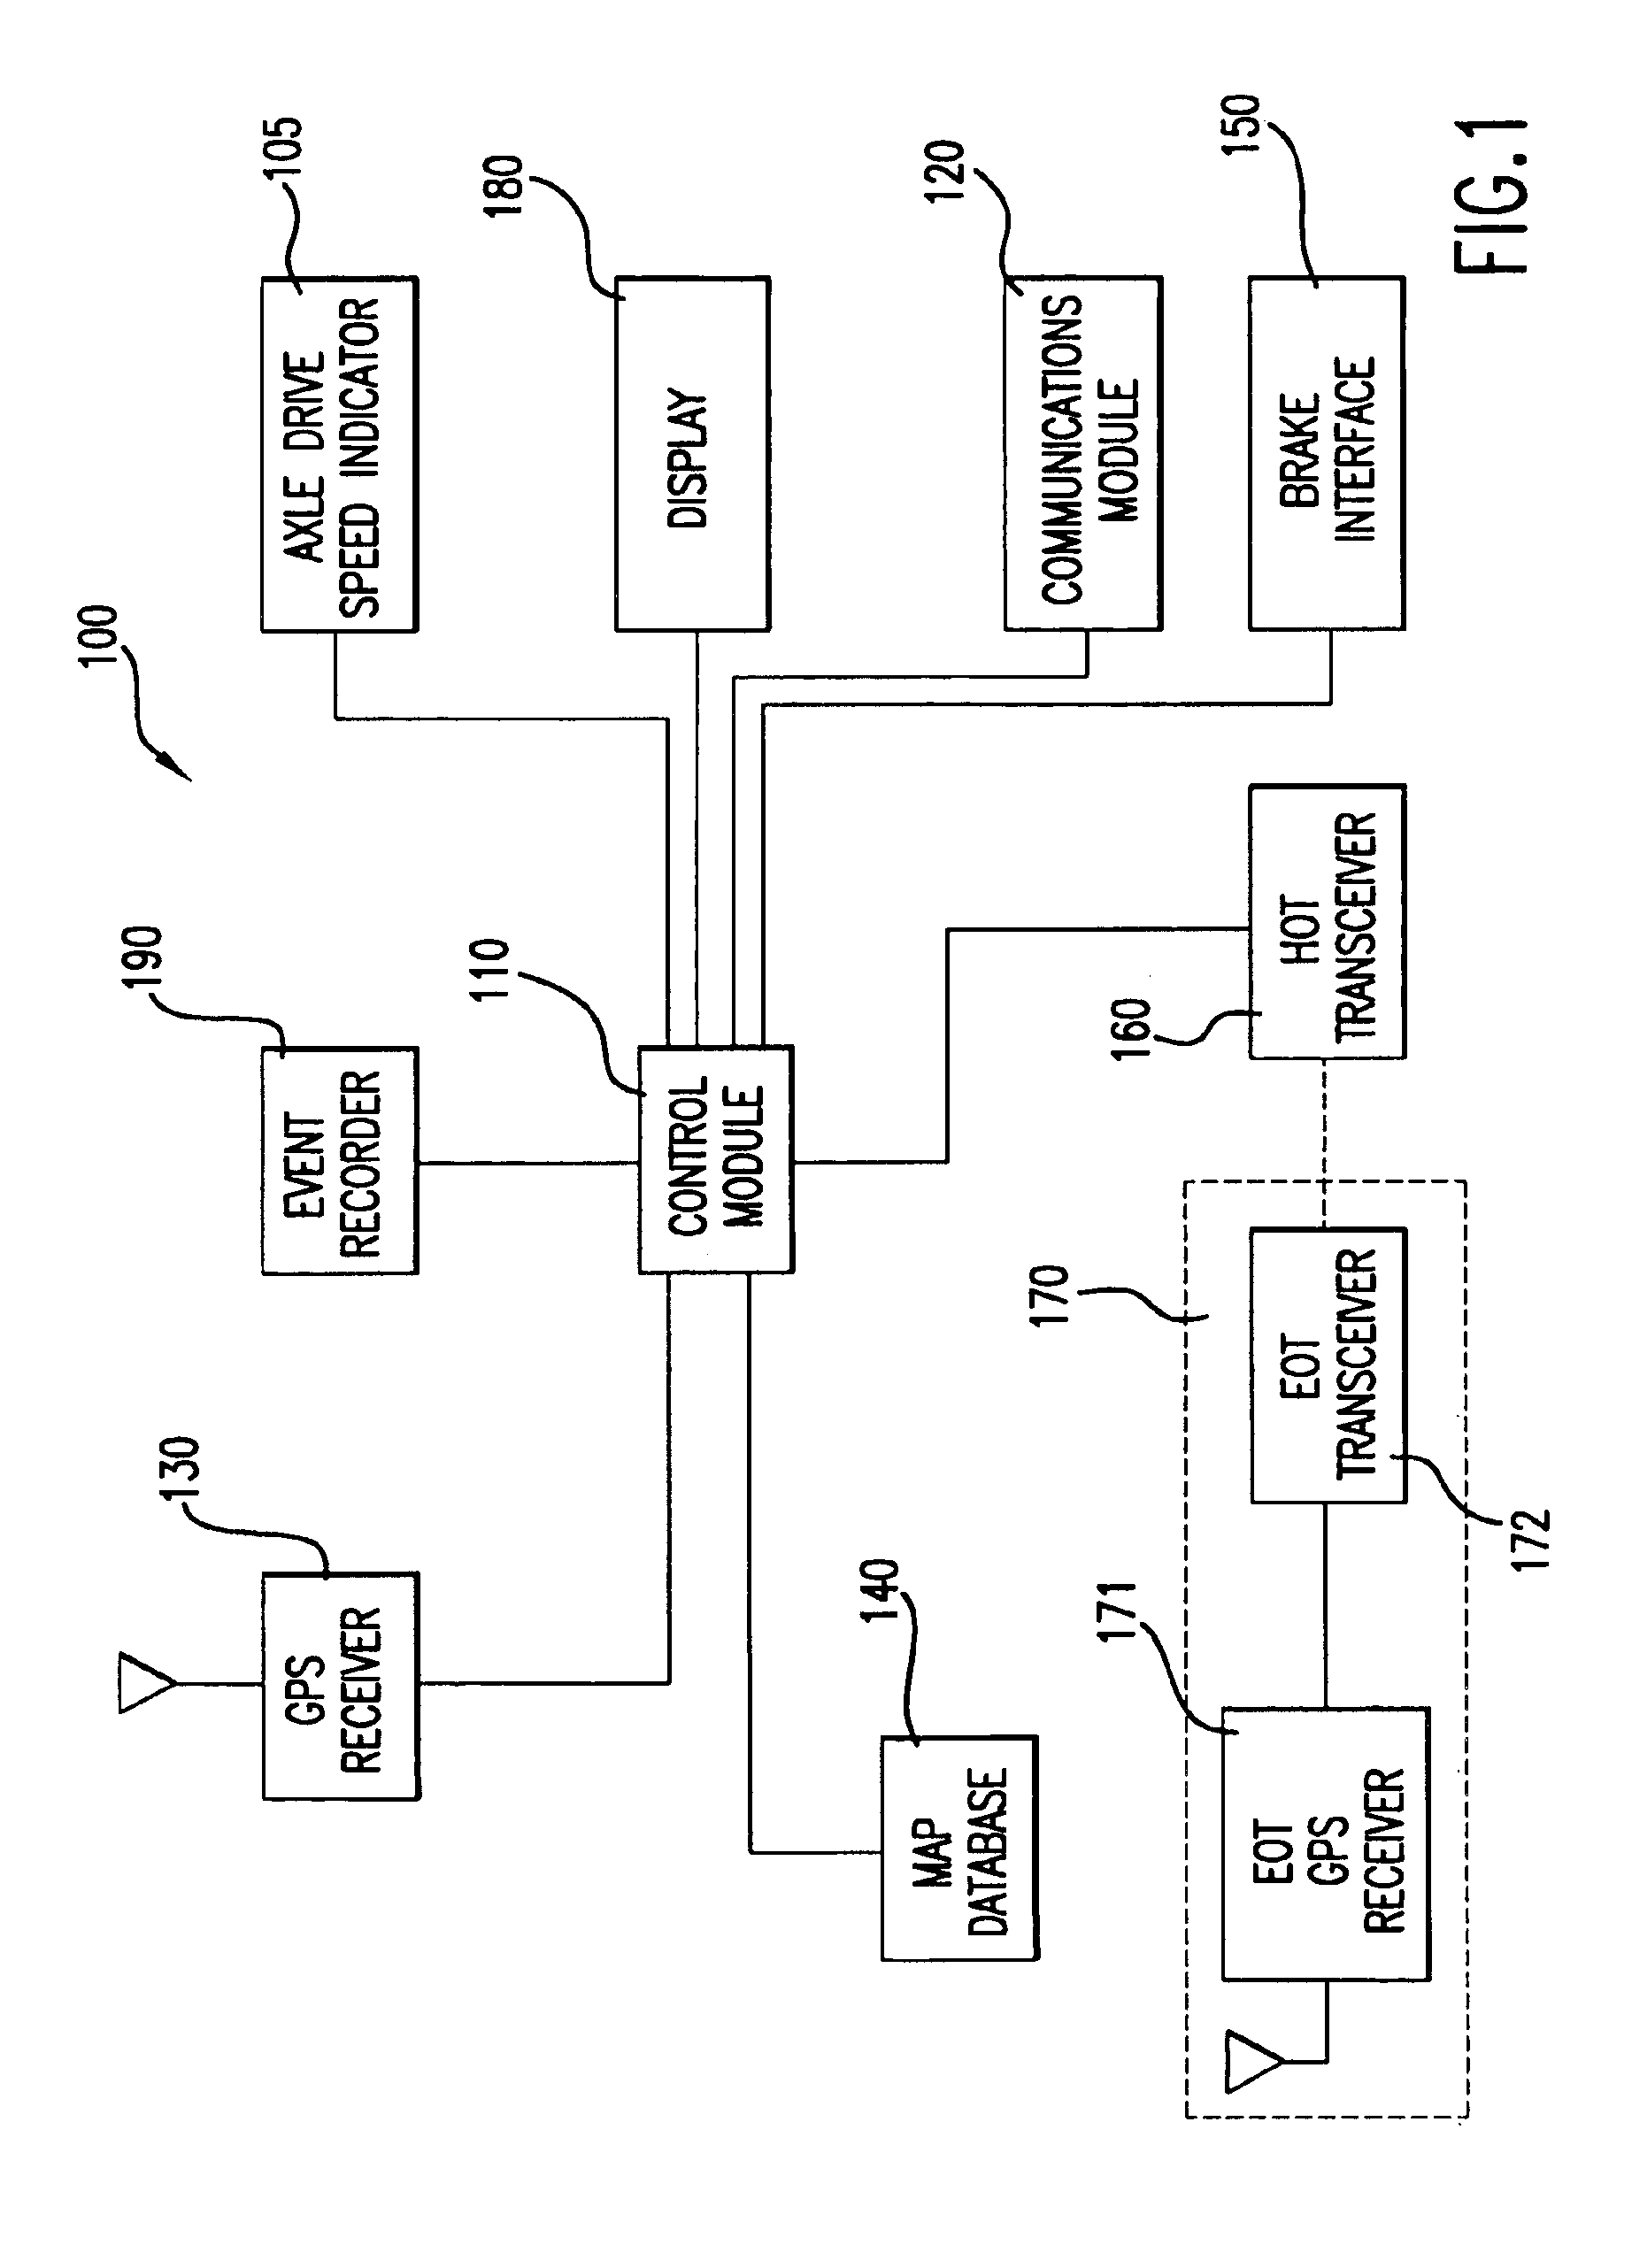 Train control system and method of controlling a train or trains